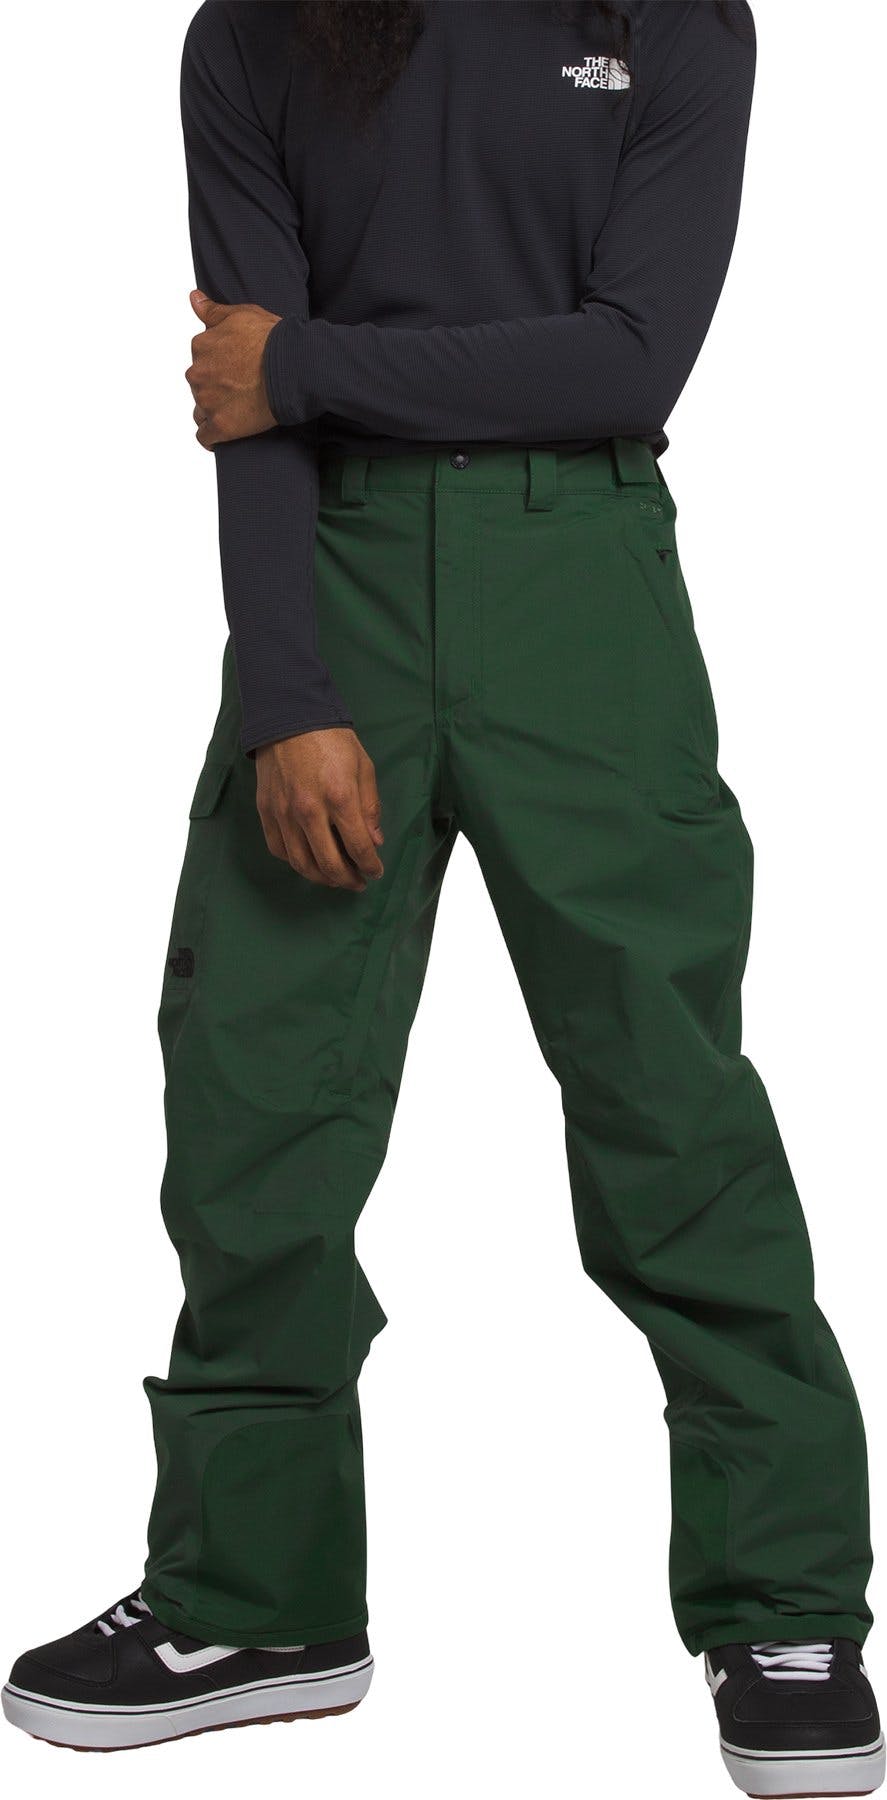 Product image for Freedom Pants - Men’s